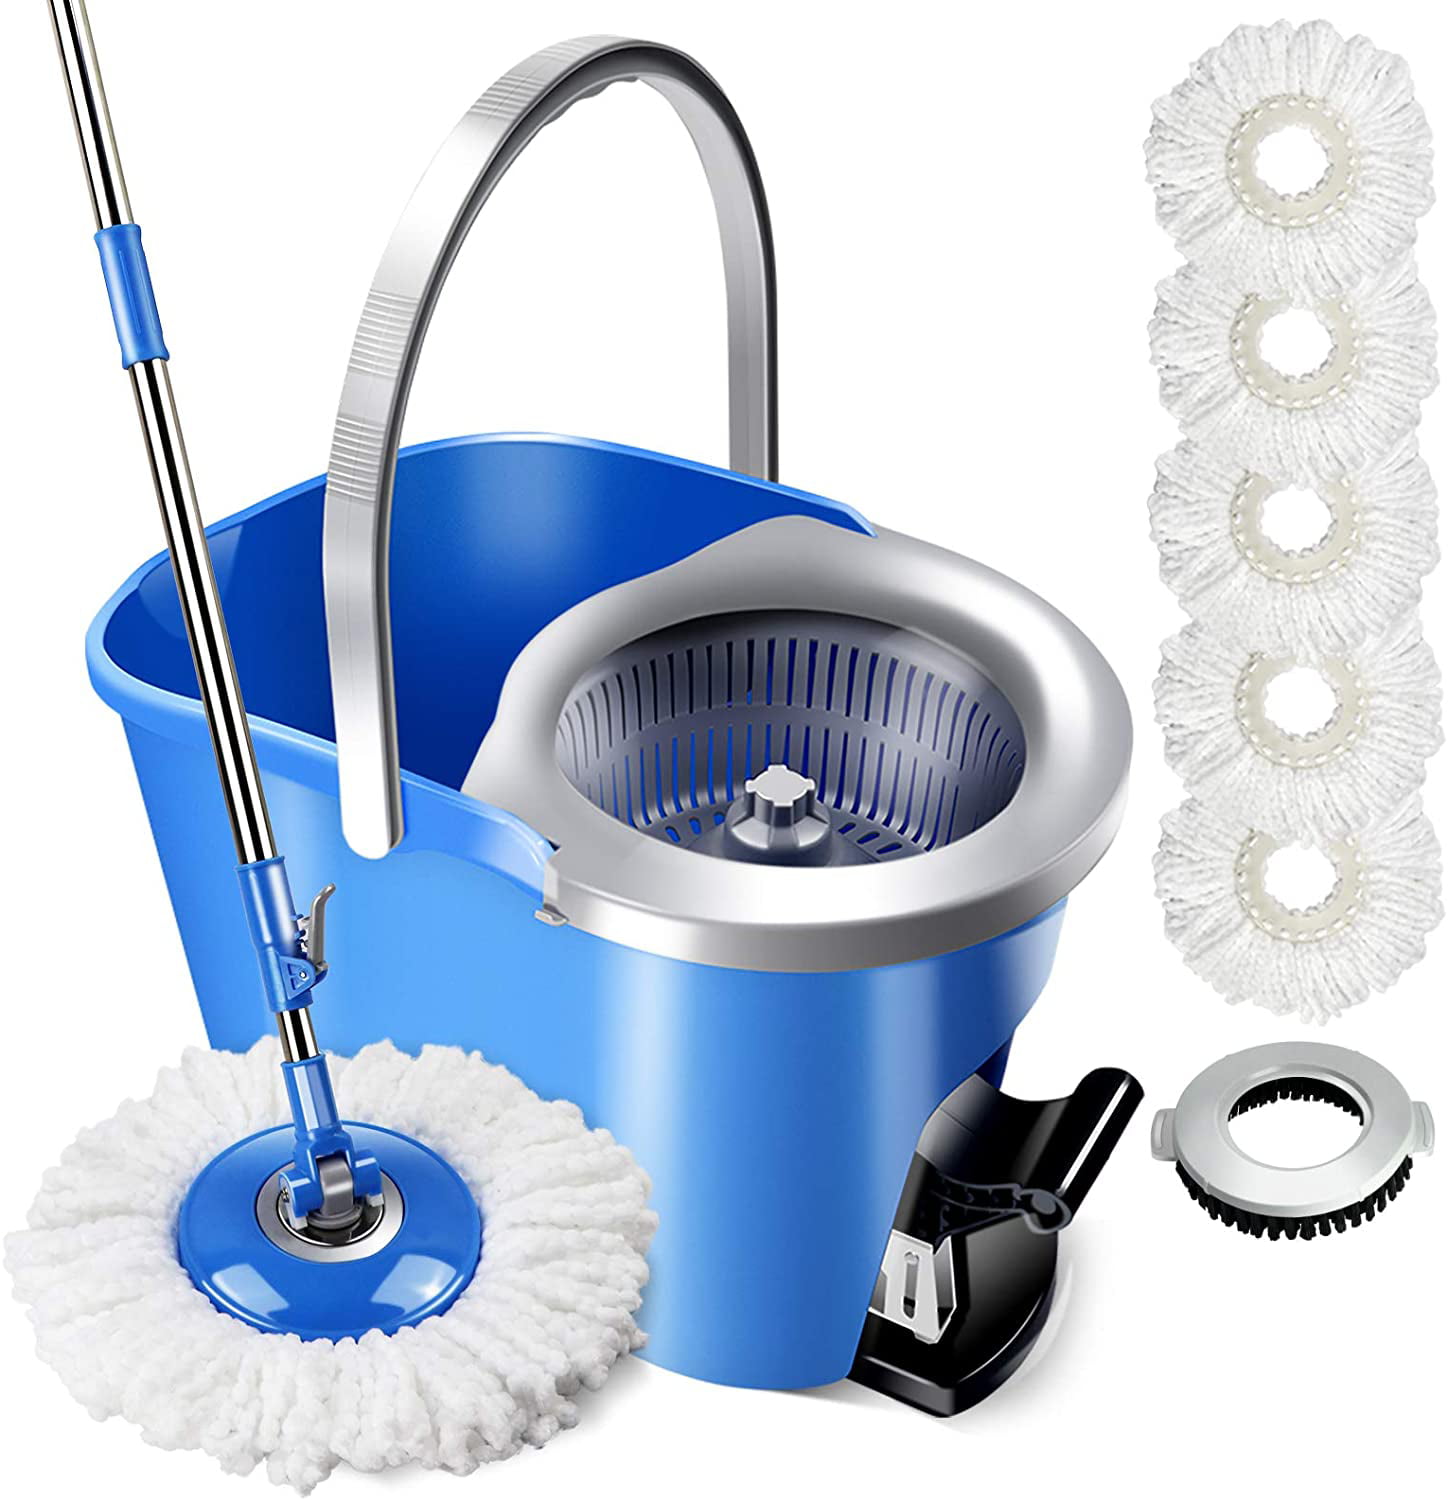 Hardwood Floor Wet Dry Mop Tsmine Floor Mop Dust Mop Commercial Mop Spin Mops for Floor Cleaning Mop and Bucket with Wringer Set with 6 Replacement Mop Heads & 1 Cleaning Brush for Hardwood Laminate 